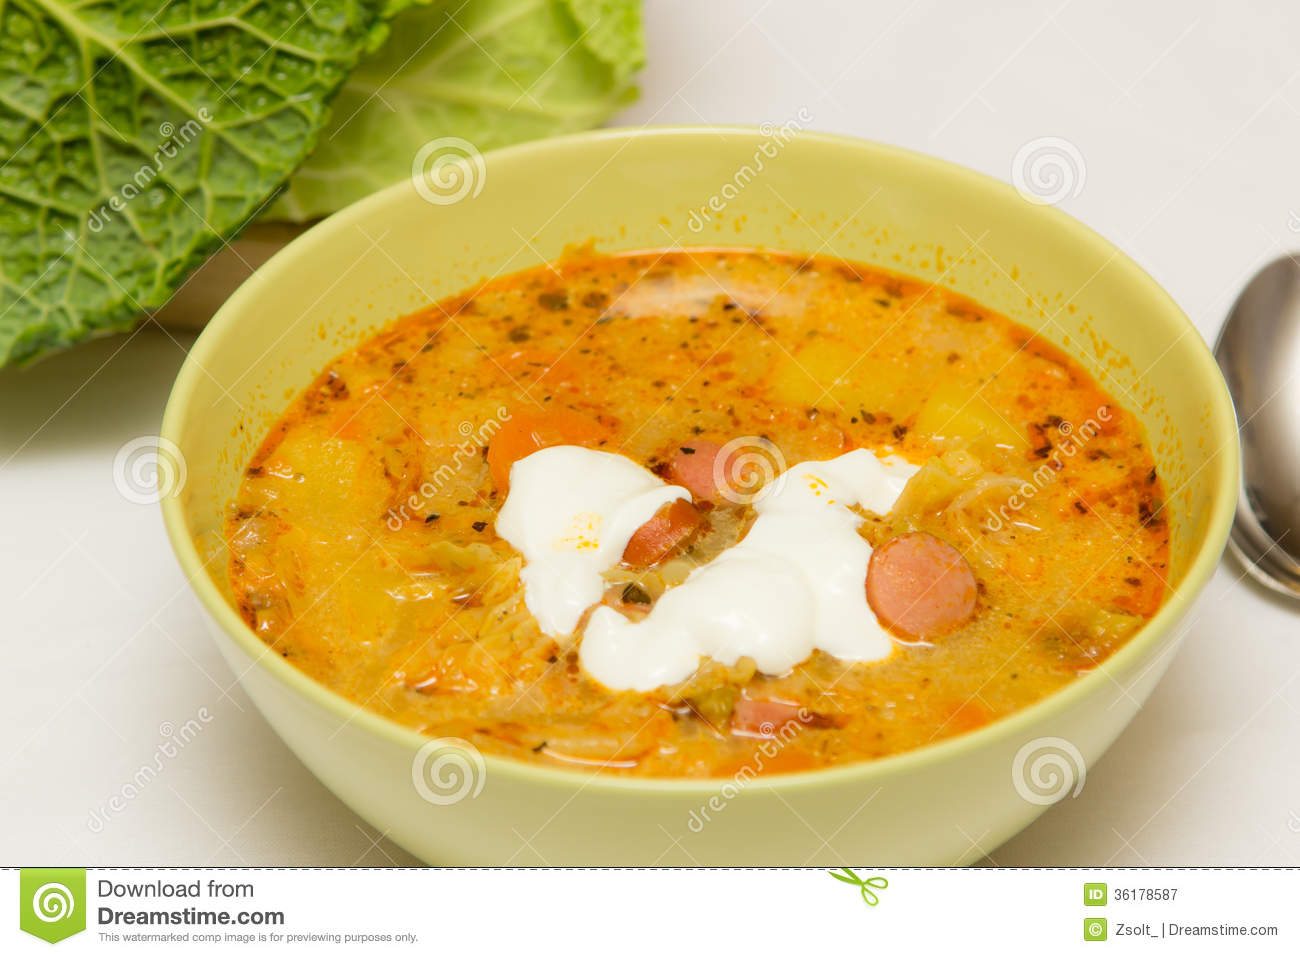 Kale Soup With Frankfurter Royalty Free Stock Photography   Image    